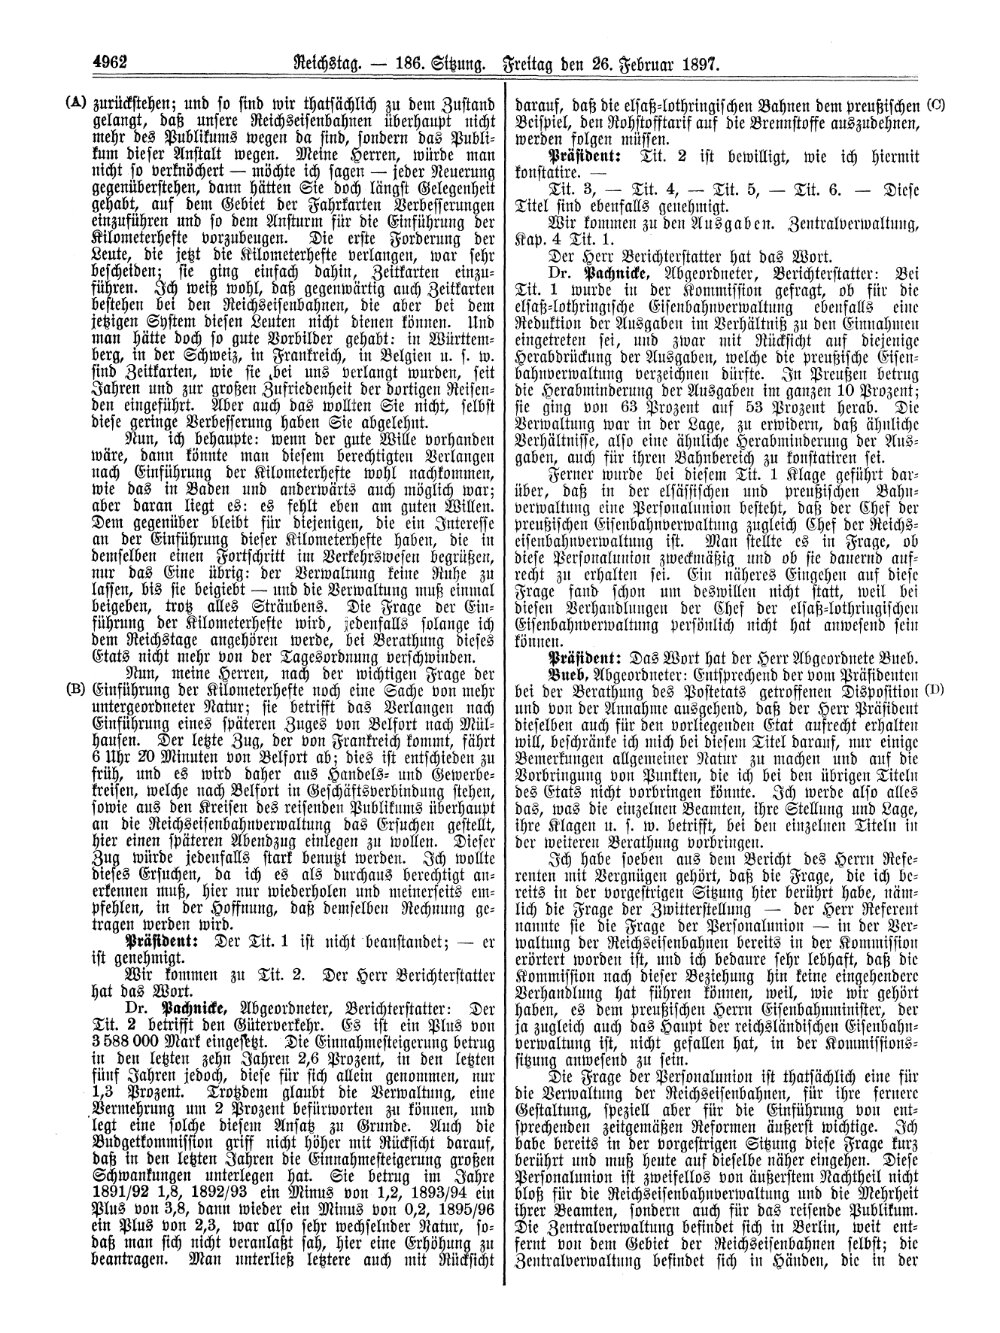 Scan of page 4962